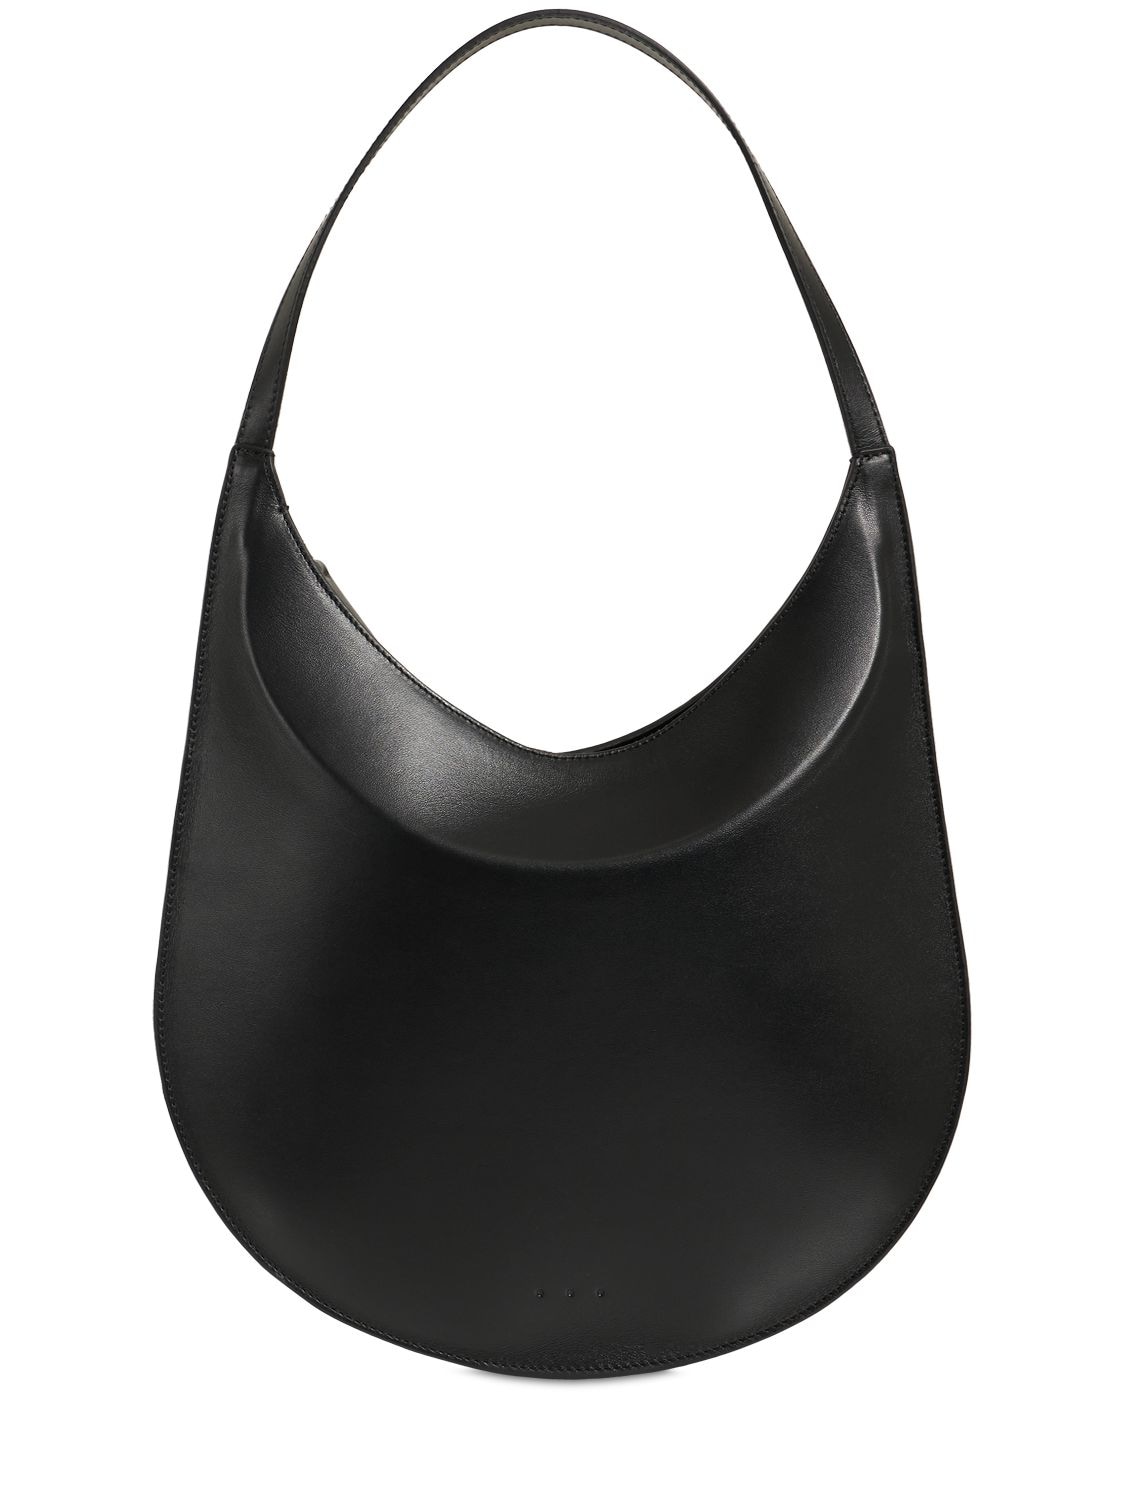 Aesther Ekme Mini Hobo Smooth Leather Shoulder Bag In Загар